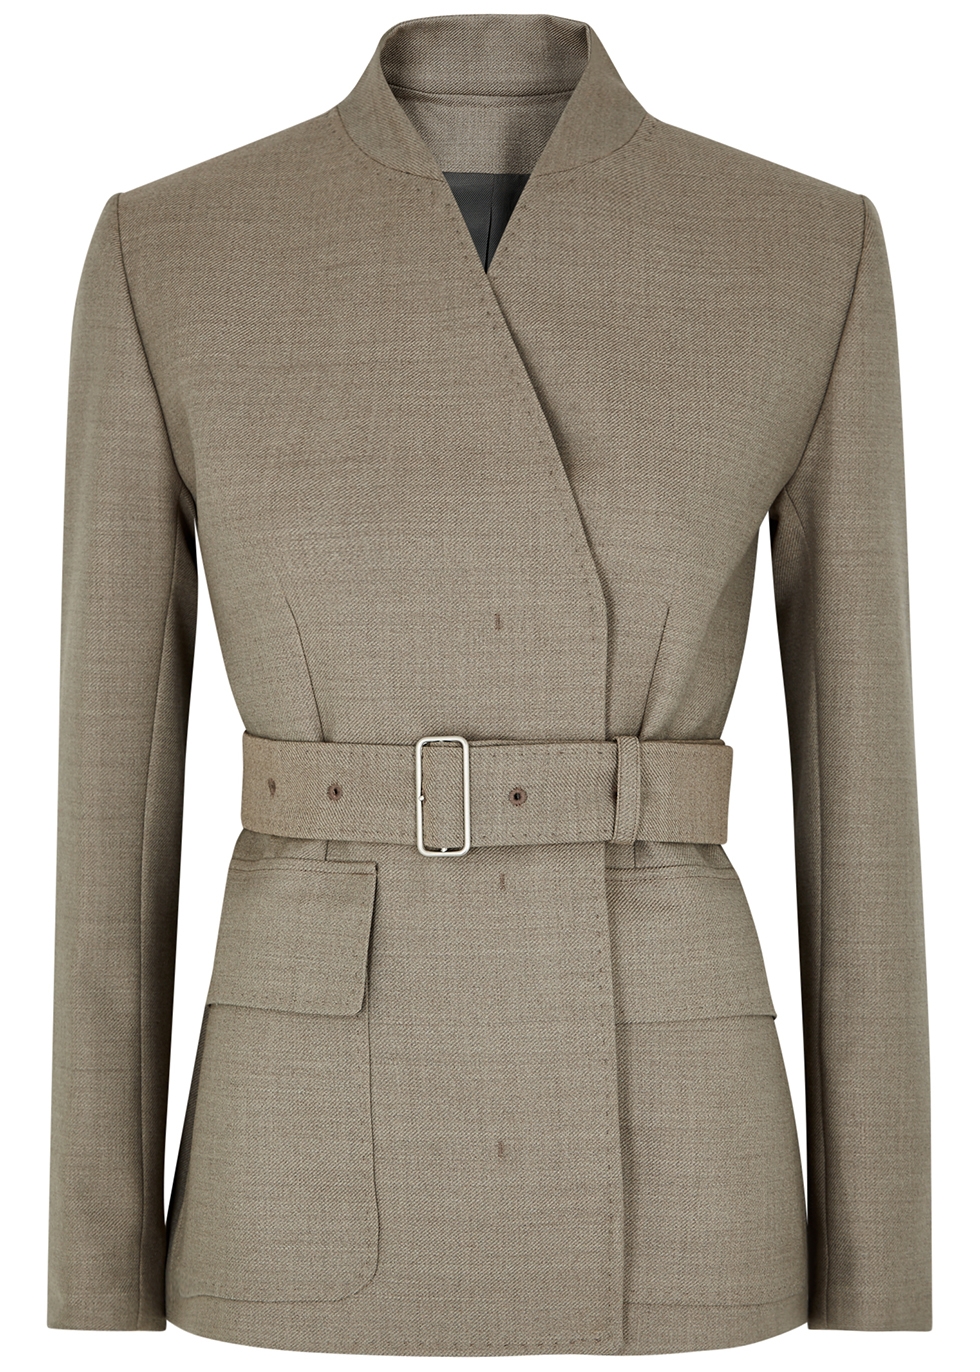 Mark Kenly Domino Tan Jelle taupe belted wool blazer